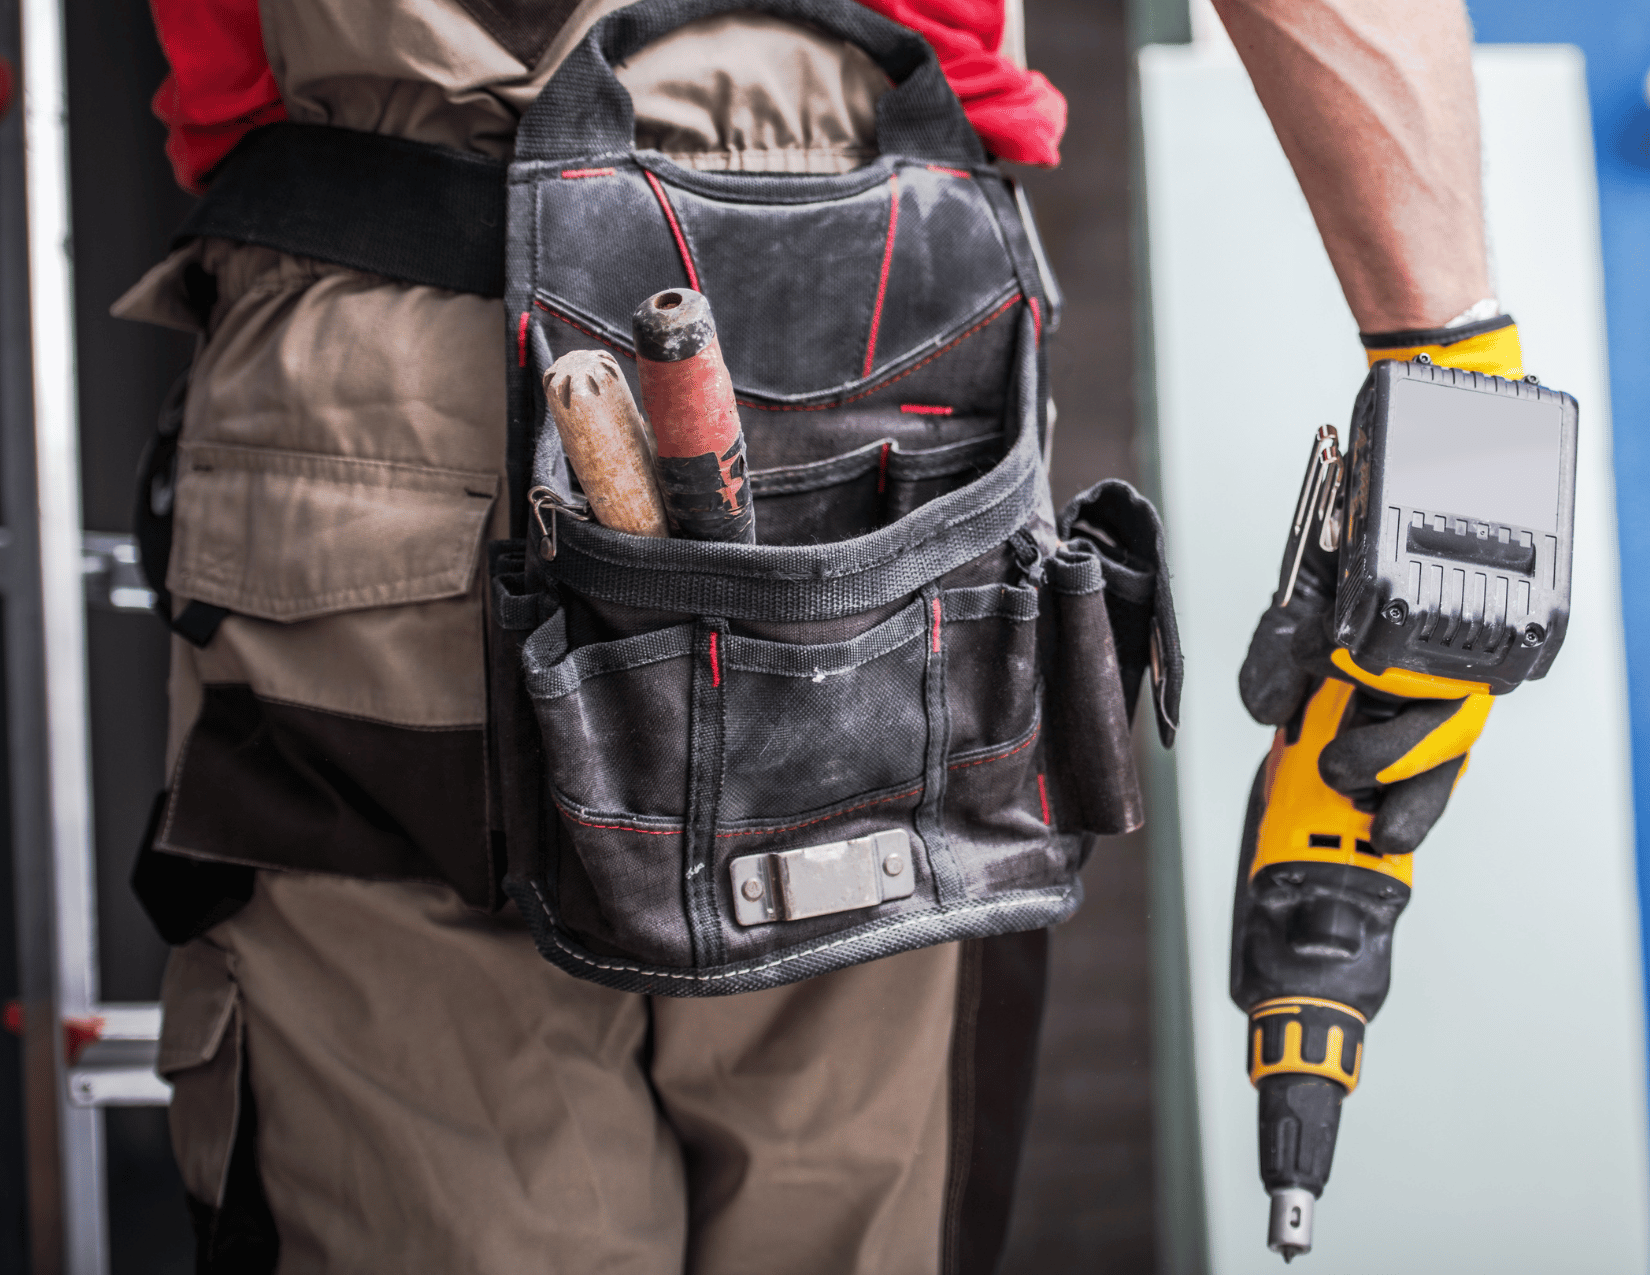 5 Best Impact Drivers Reviews